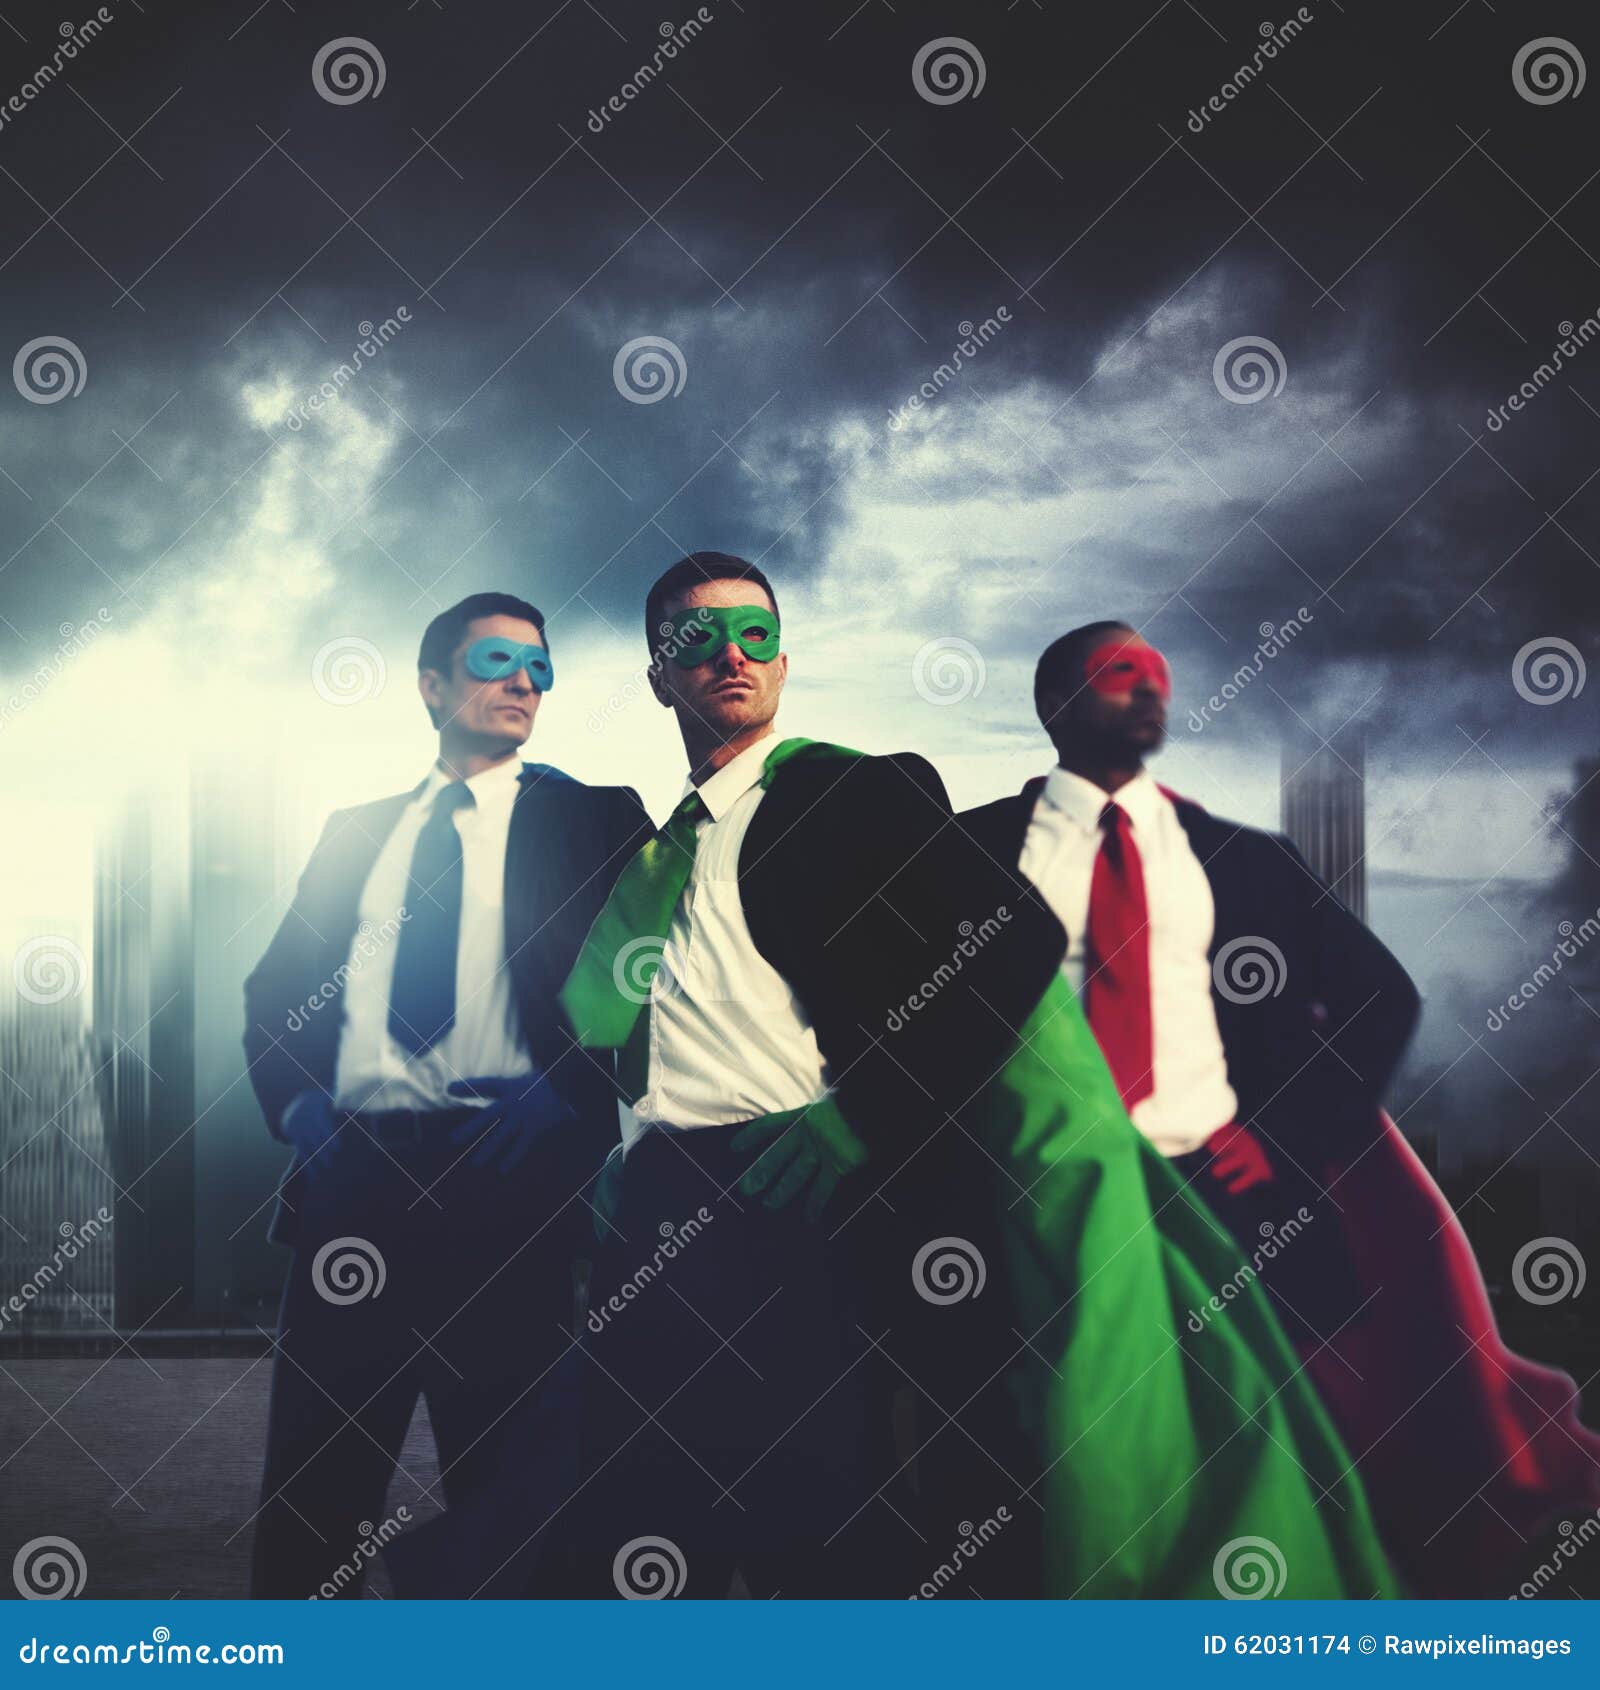 business people superheroes costume power concept